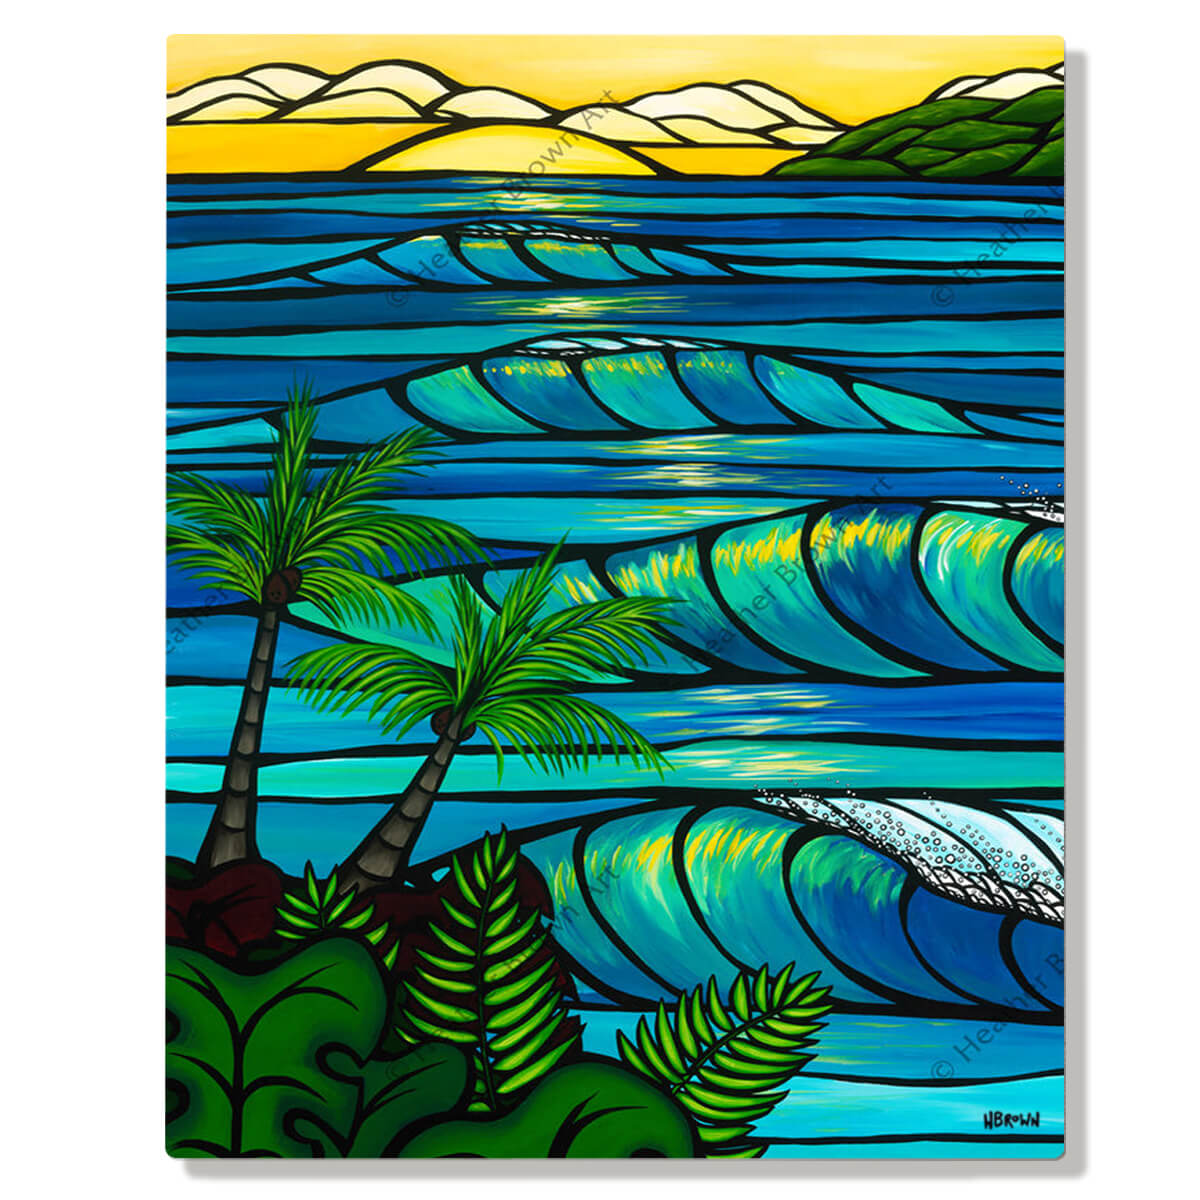 A metal art print featuring crashing waves and a classic Hawaiian sunset by Hawaii surf artist Heather Brown